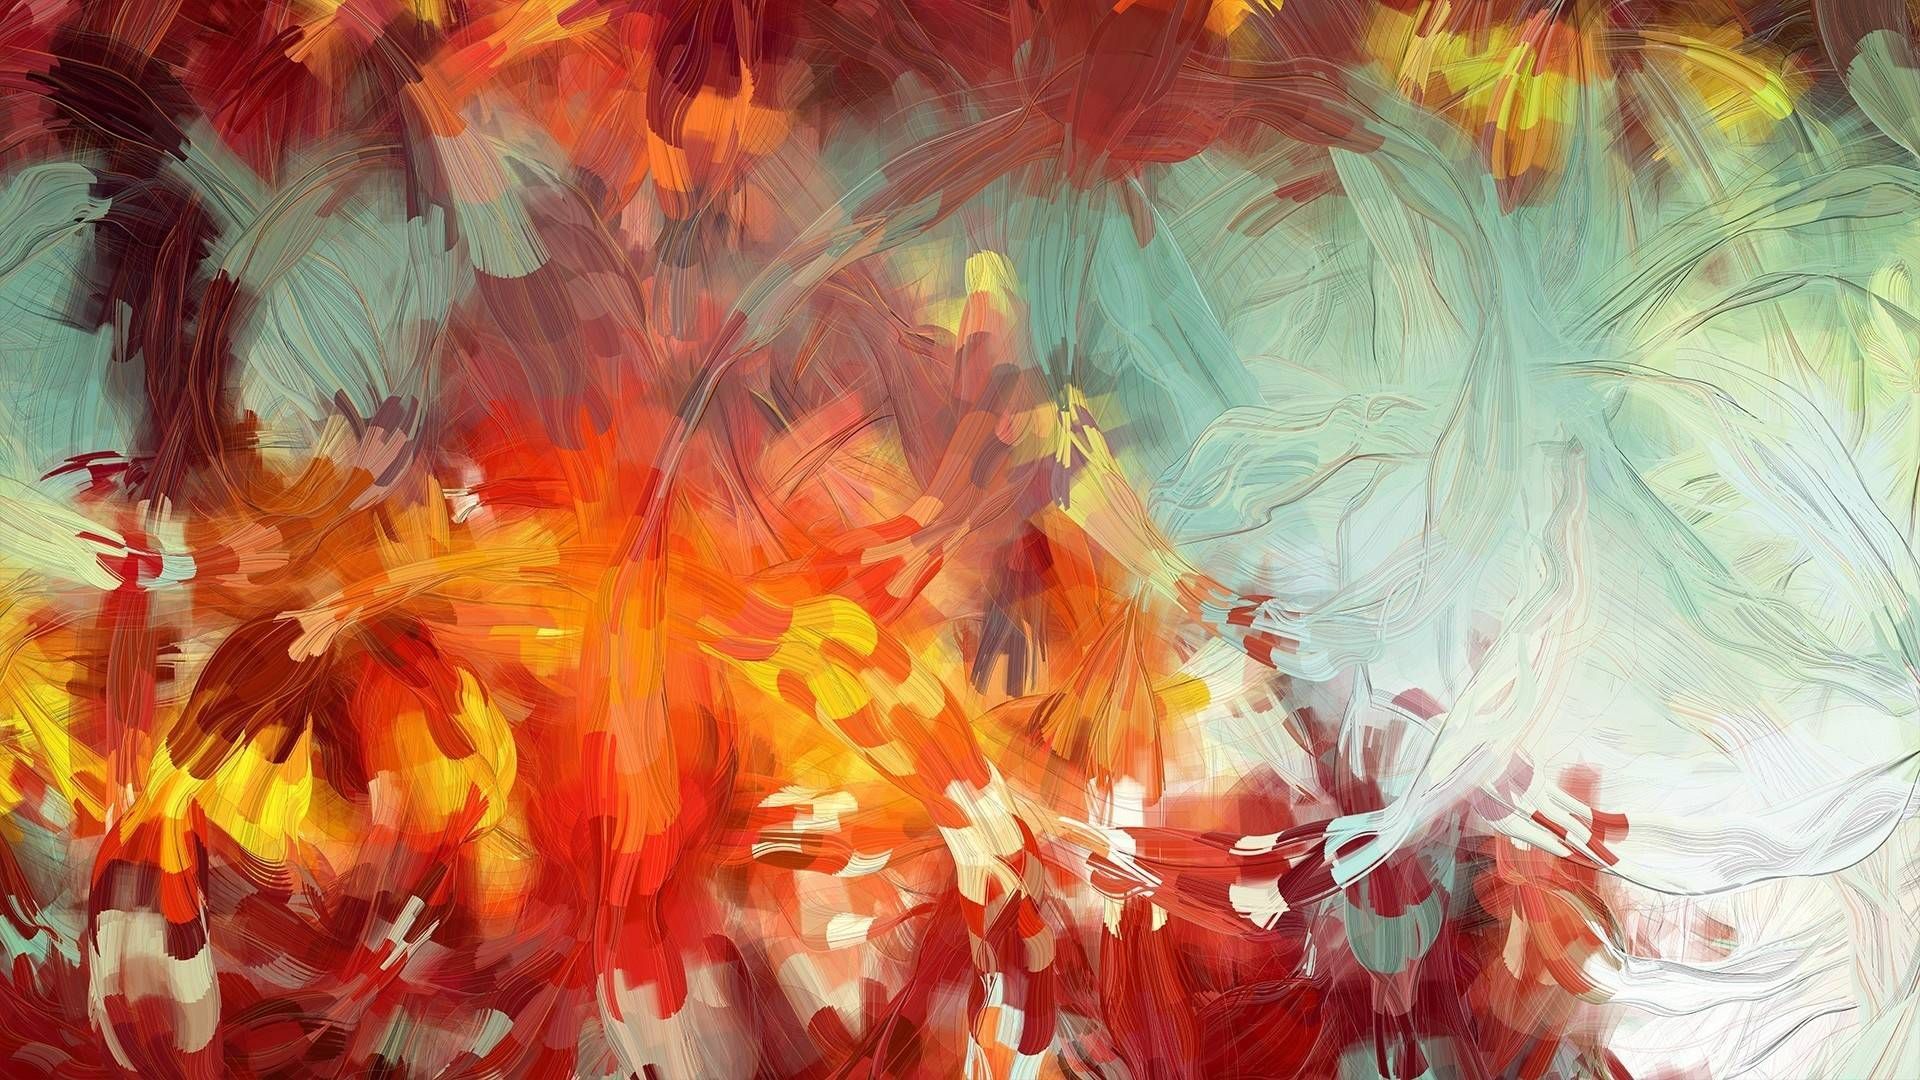 Abstract Paintings 1920×1080 Wallpaper 2174723. Abstract painting, Abstract art wallpaper, Painting